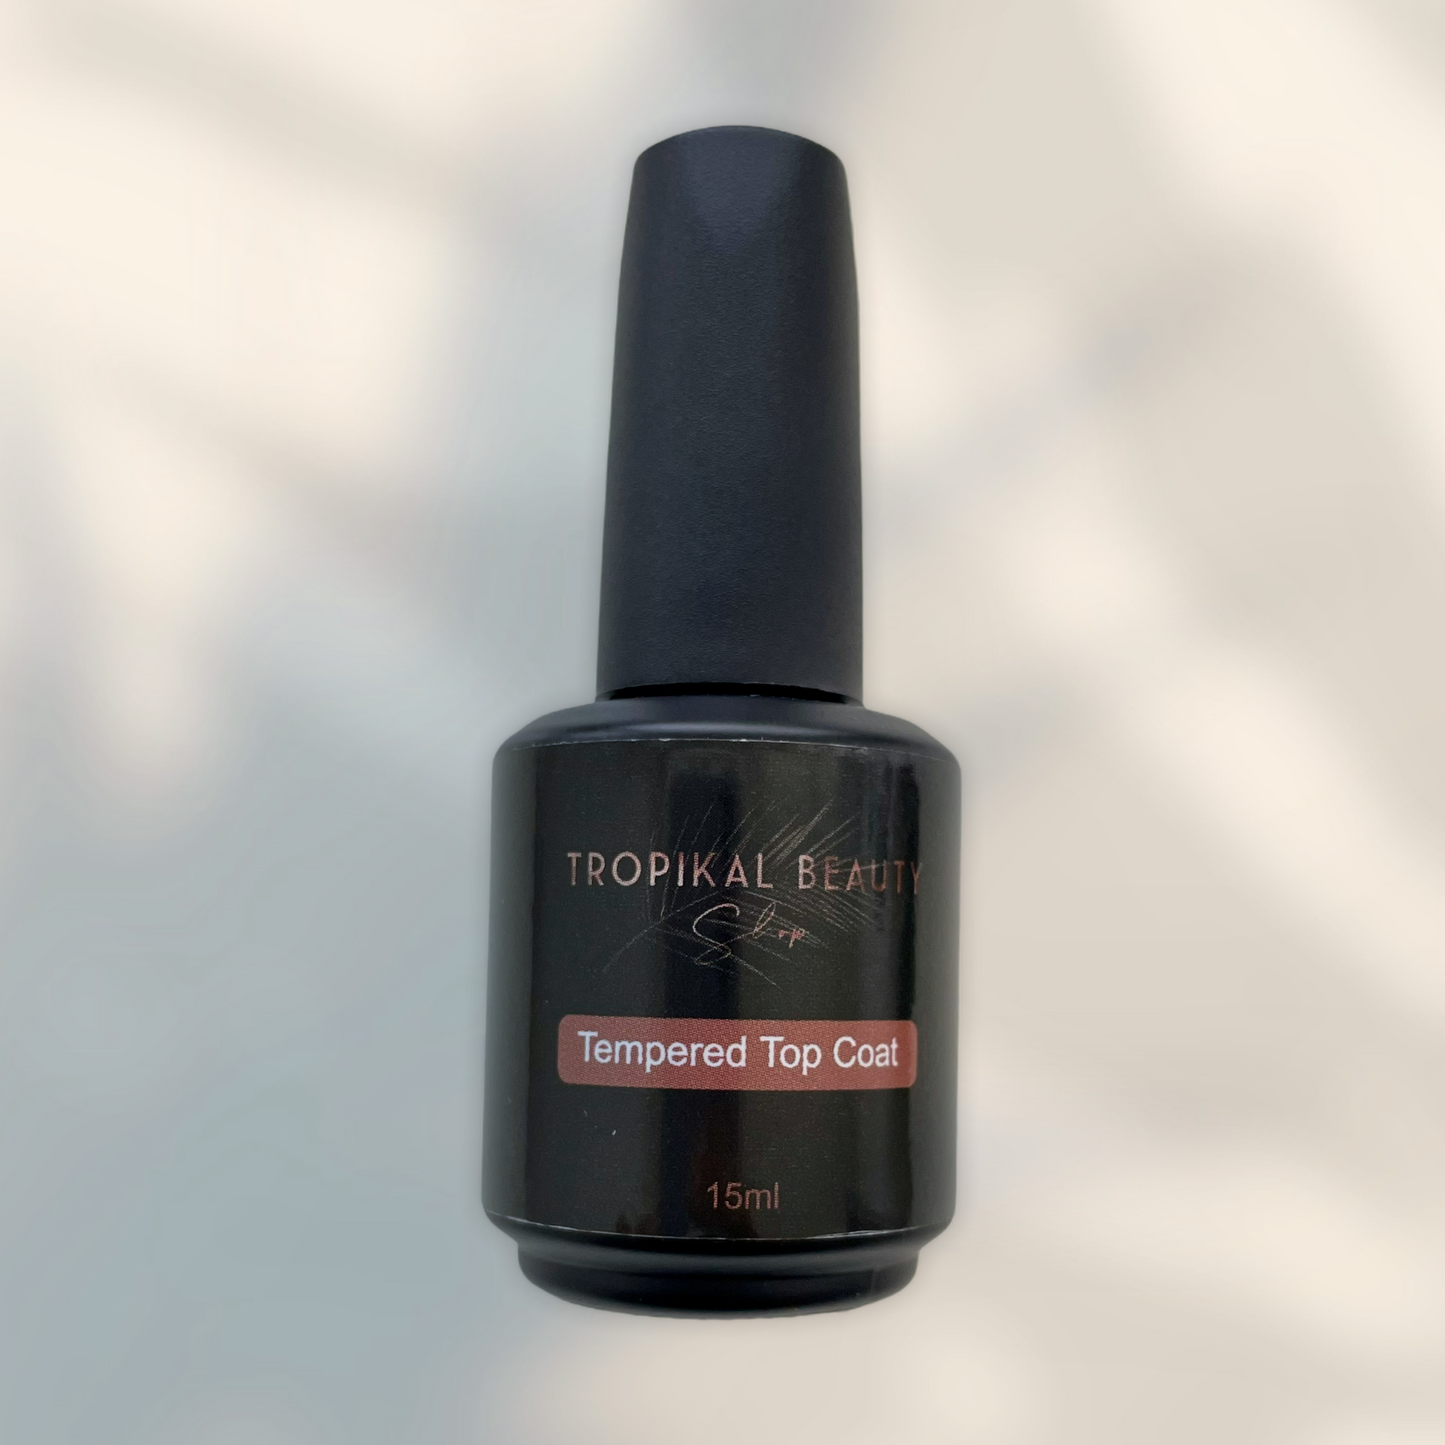 Tempered top coat (non-whipe)